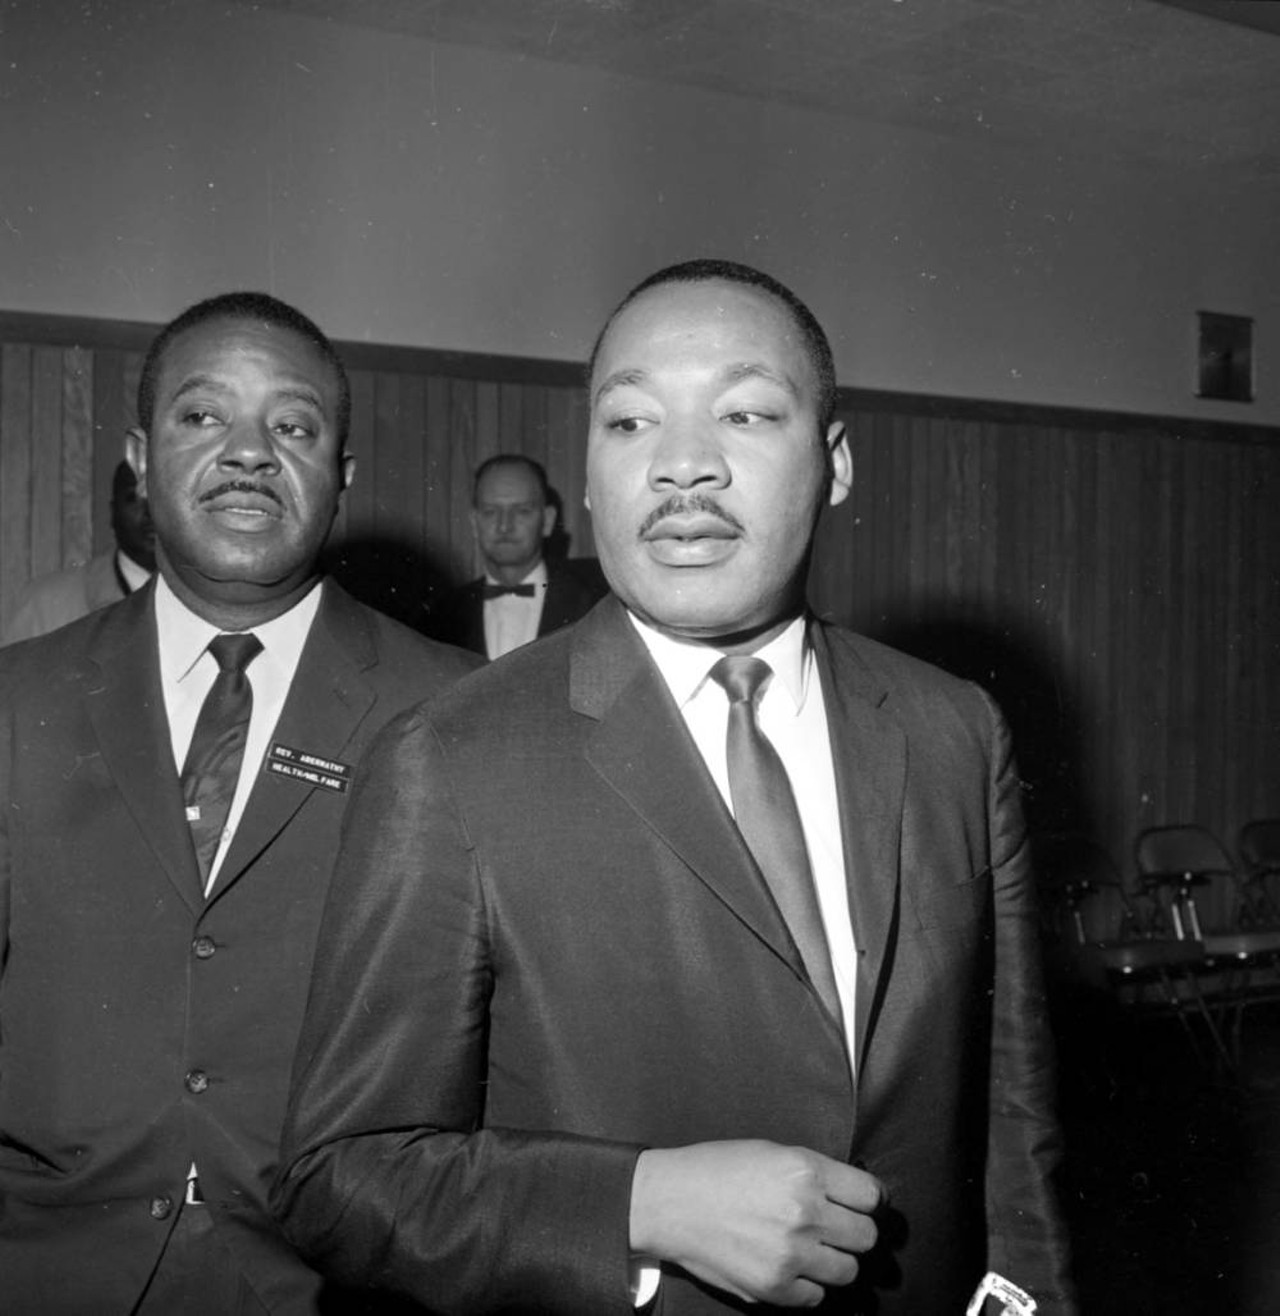 Photos of Dr. Martin Luther King Jr.’s 1963 Detroit ‘Walk to Freedom’